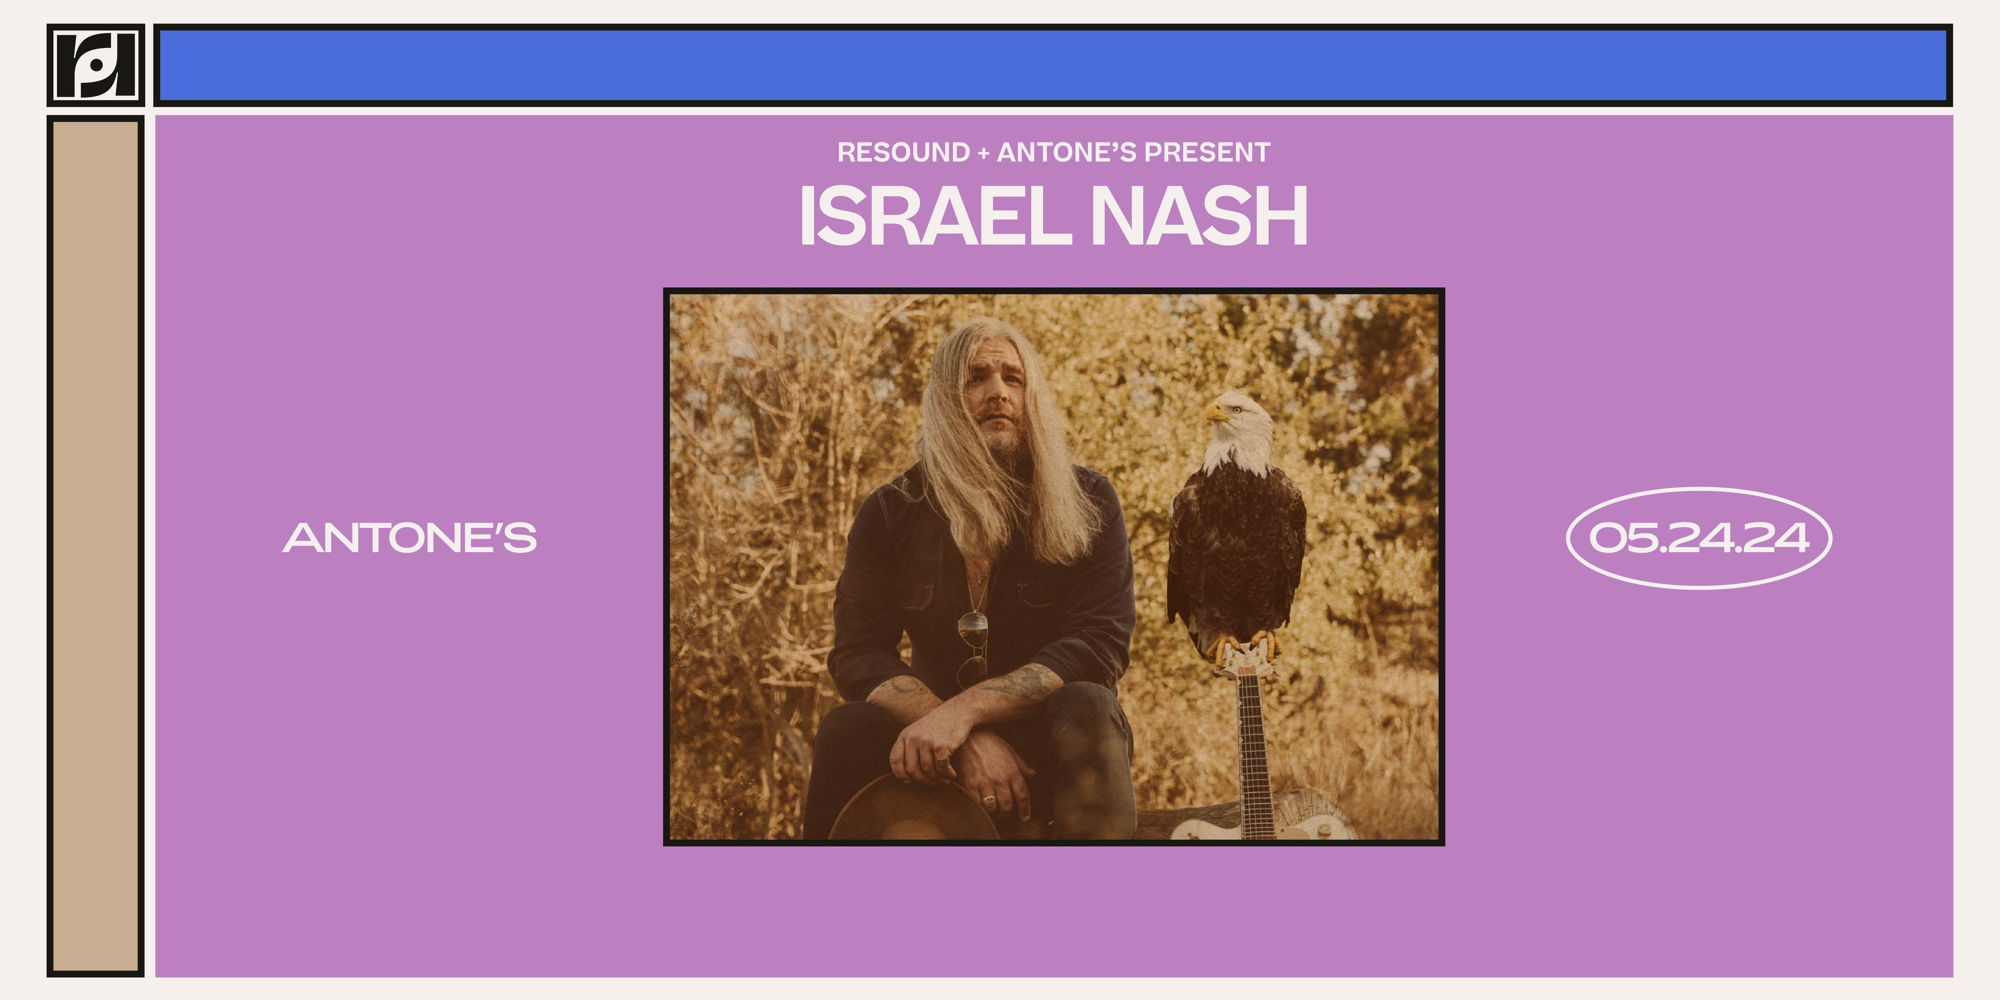 Resound and Antone's Present: Israel Nash at Antone's promotional image